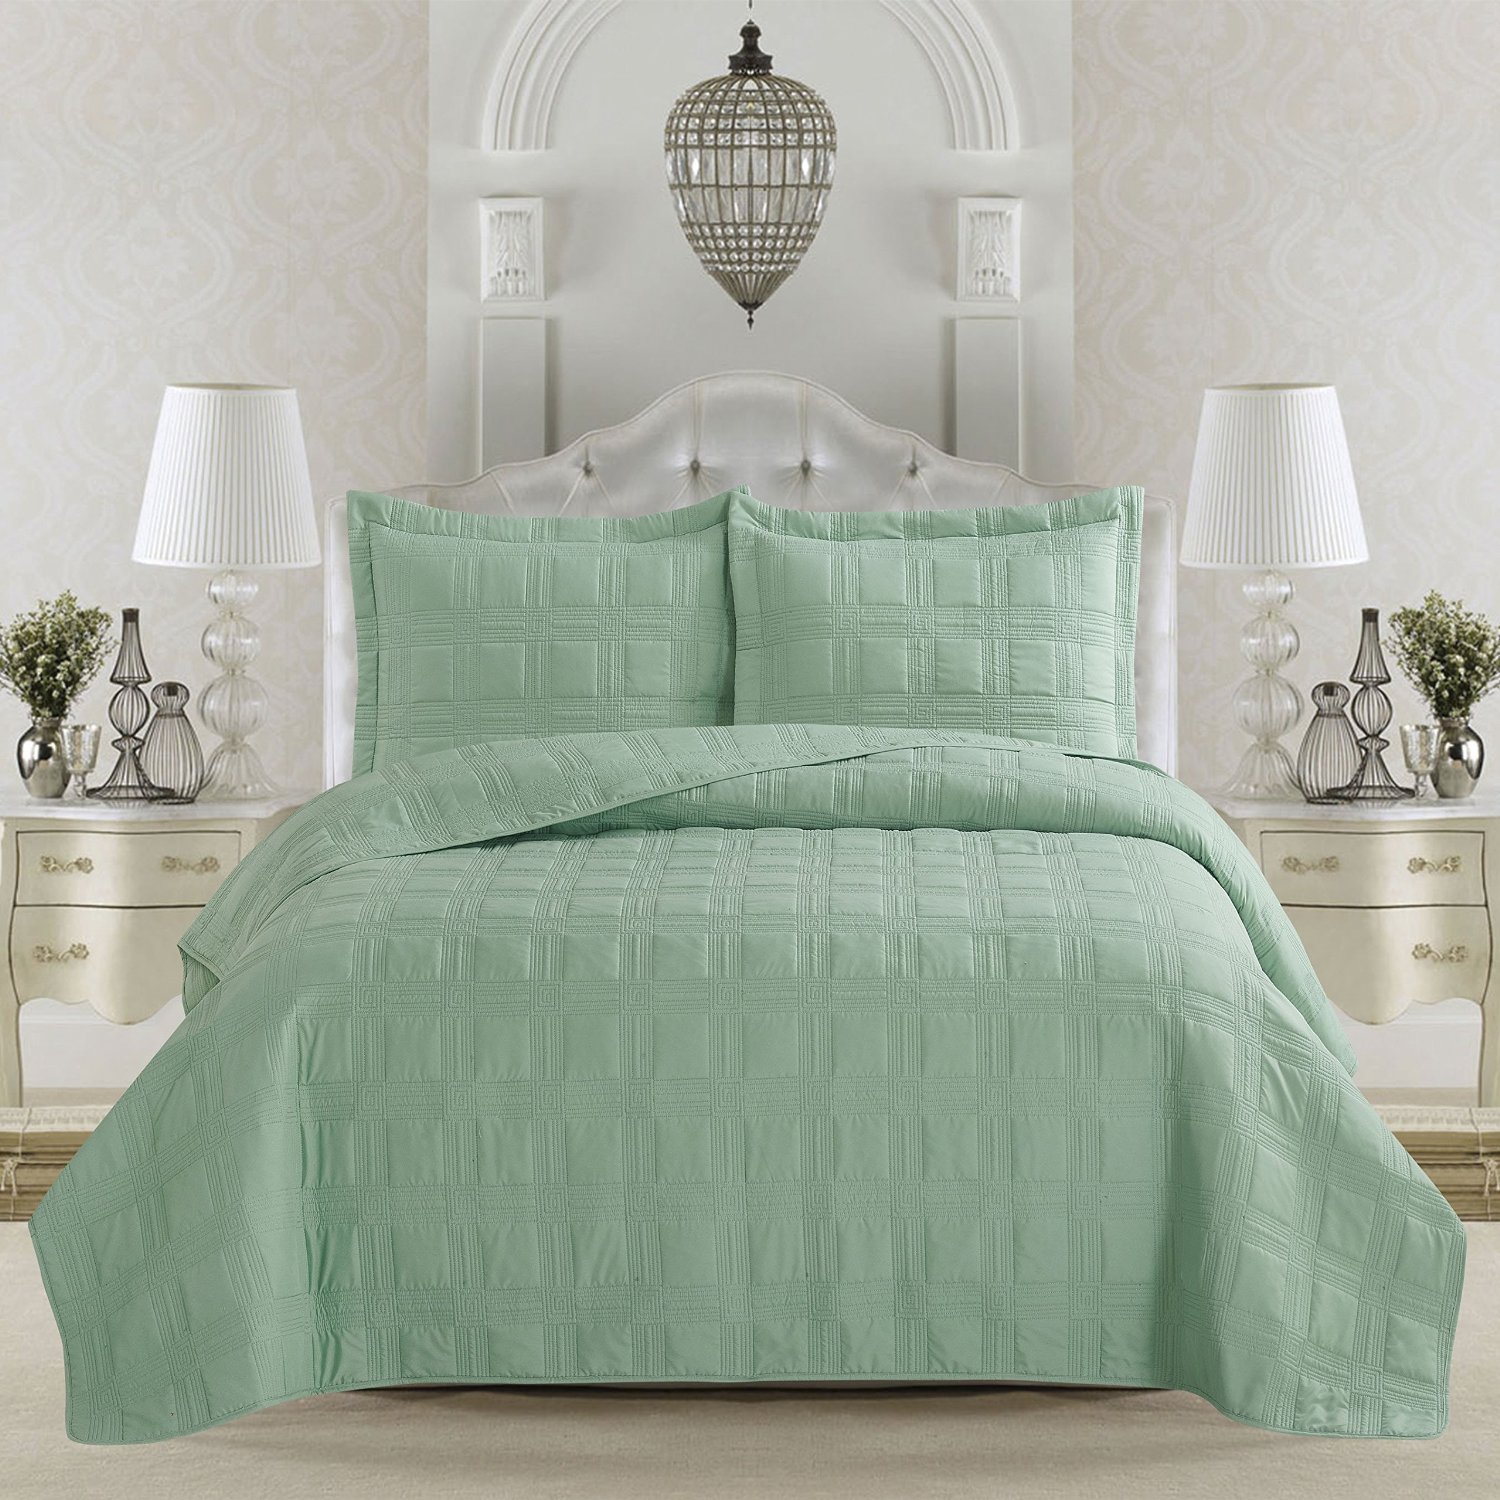 green-bedspread-3-piece-luxury-quilt-set-with-shams